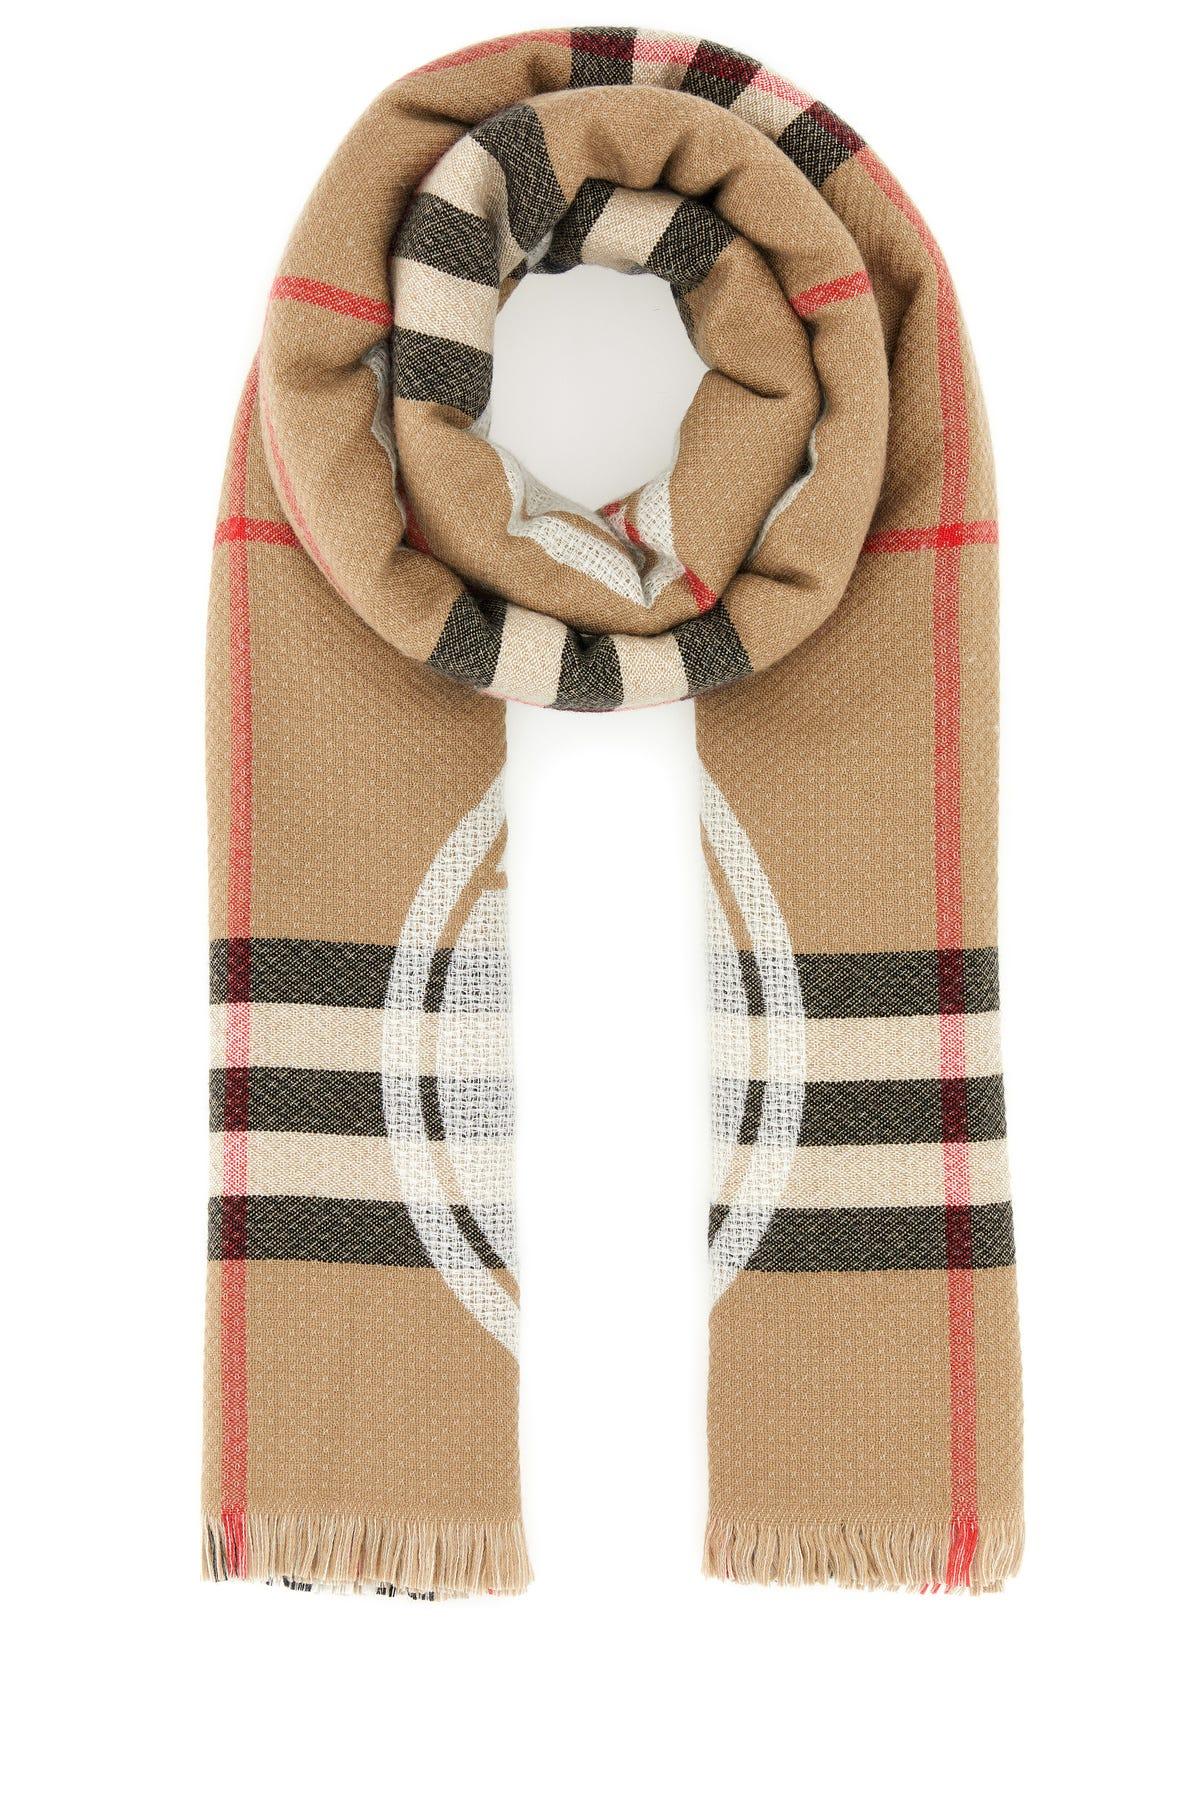 Burberry Embroidered Cashmere Blend Scarf in Natural | Lyst